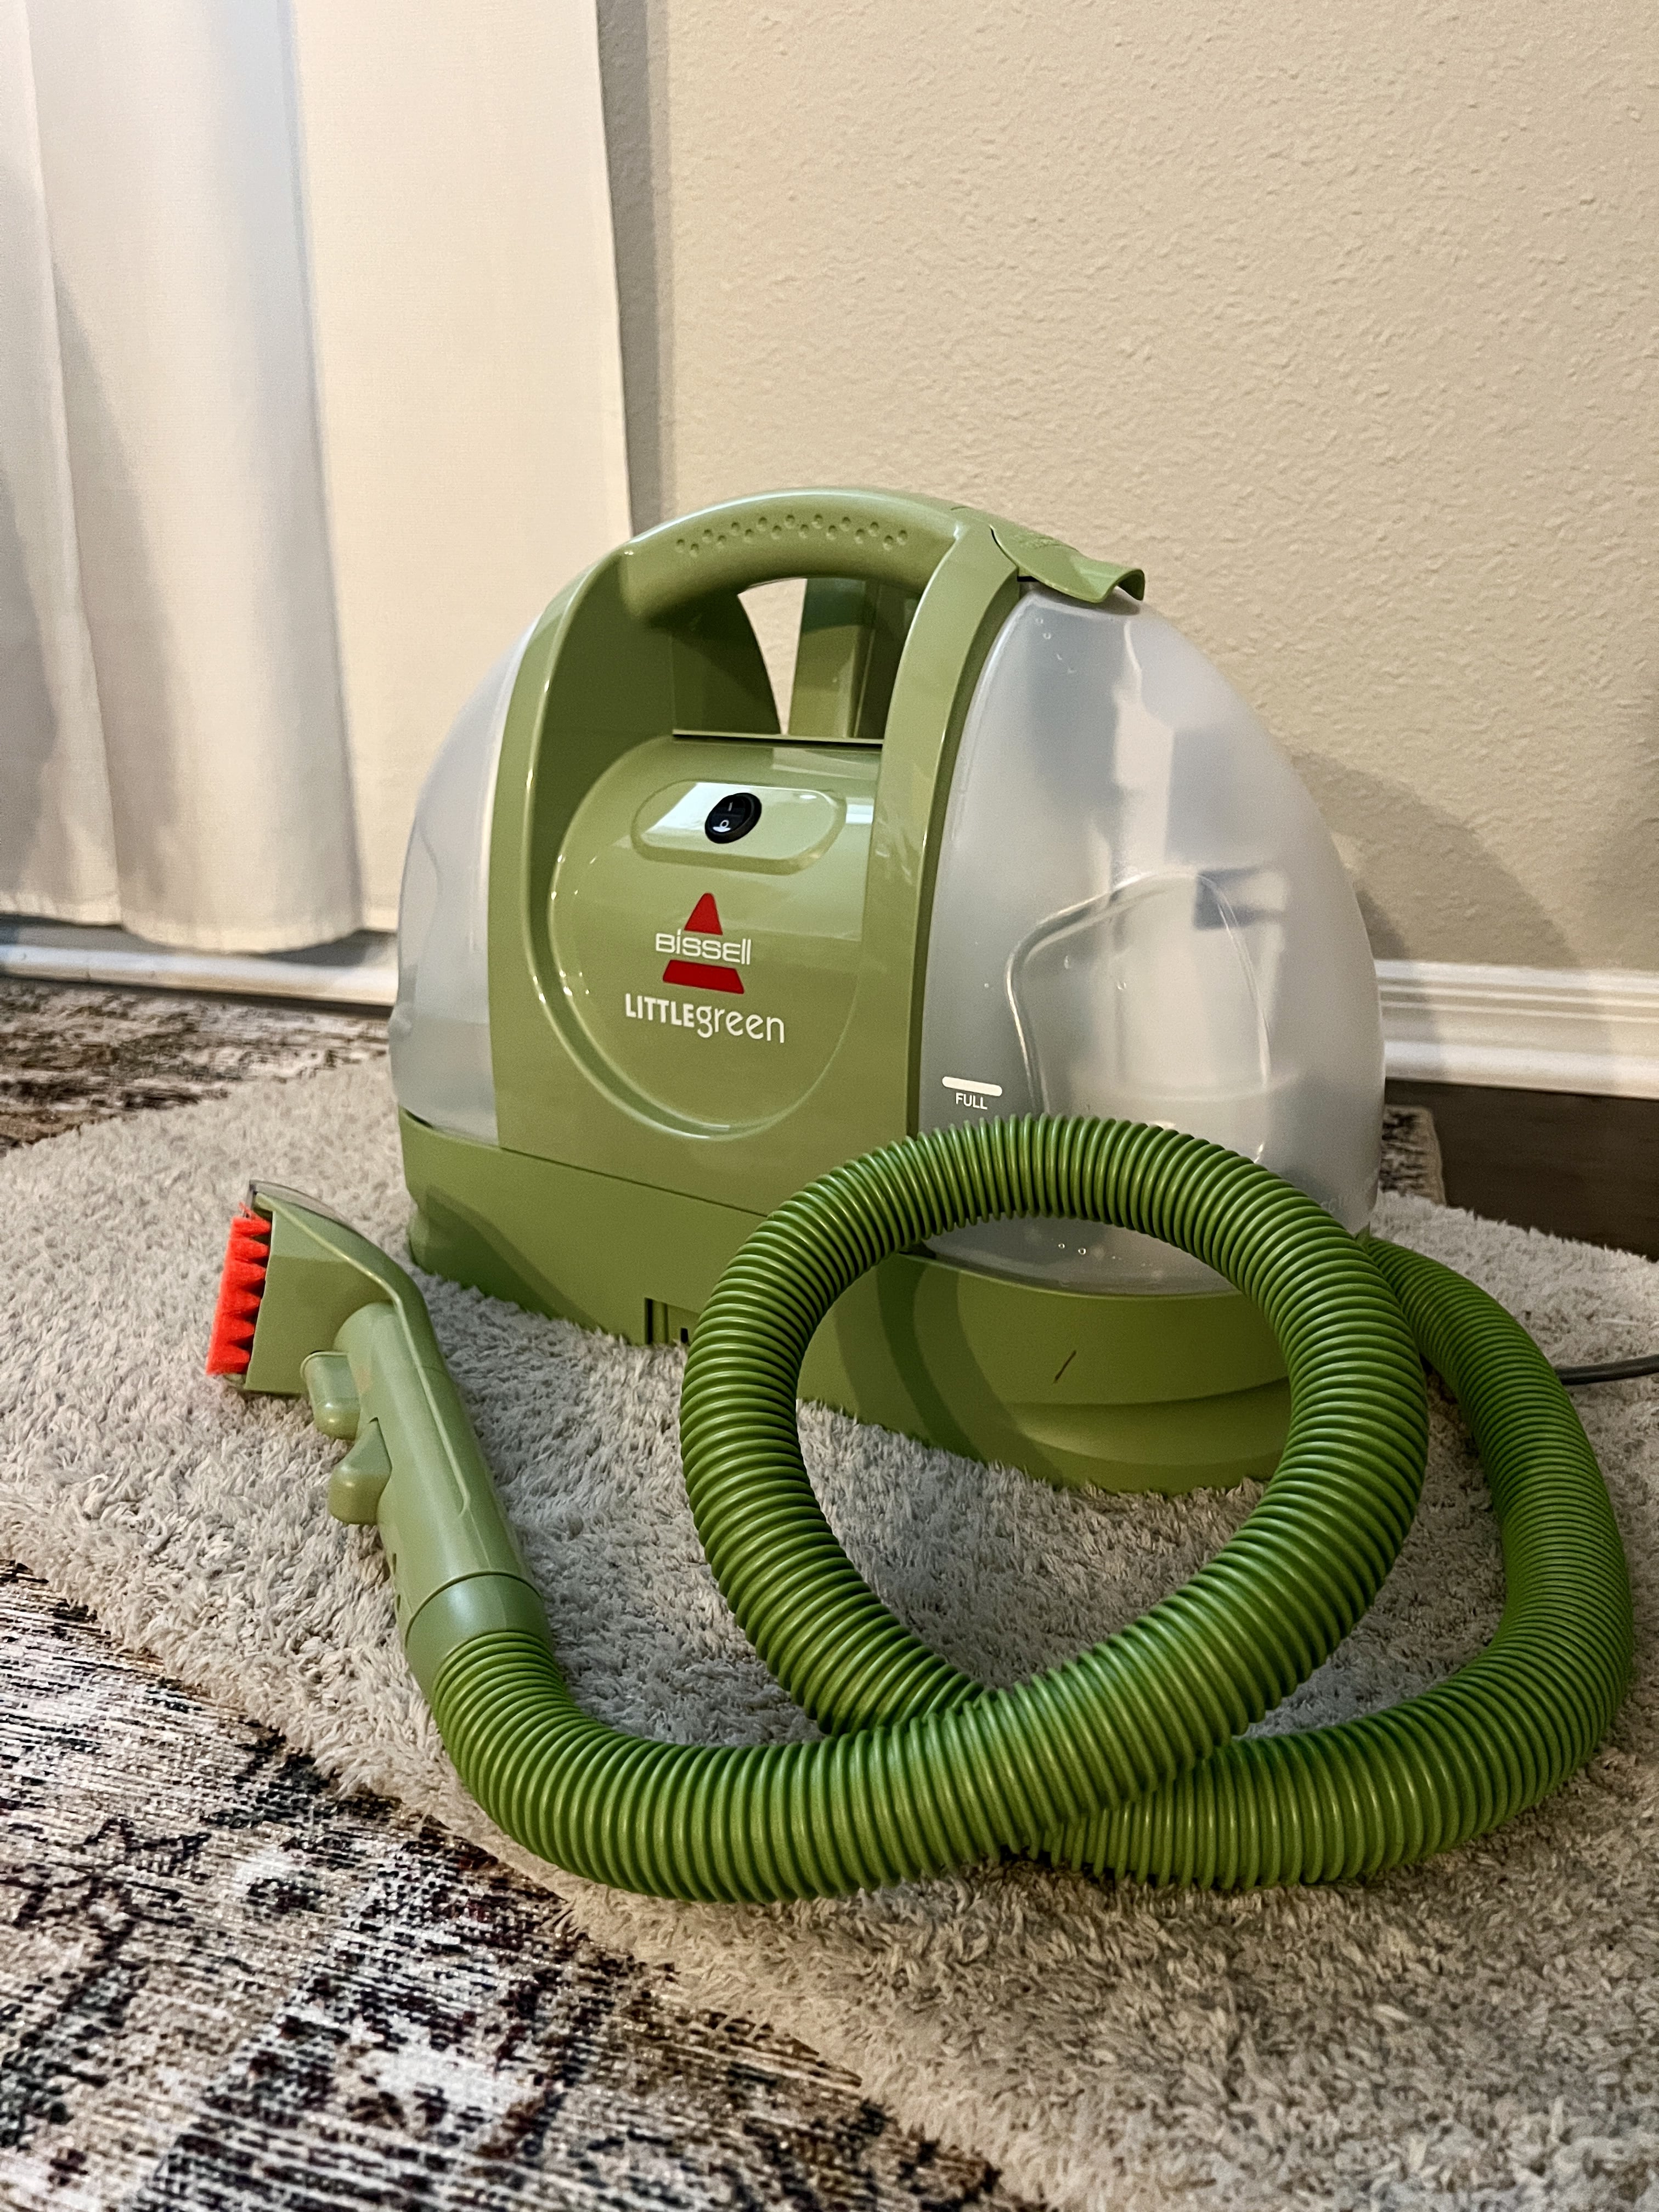 Bissell Little Green Multi-Purpose Portable Cleaner Review